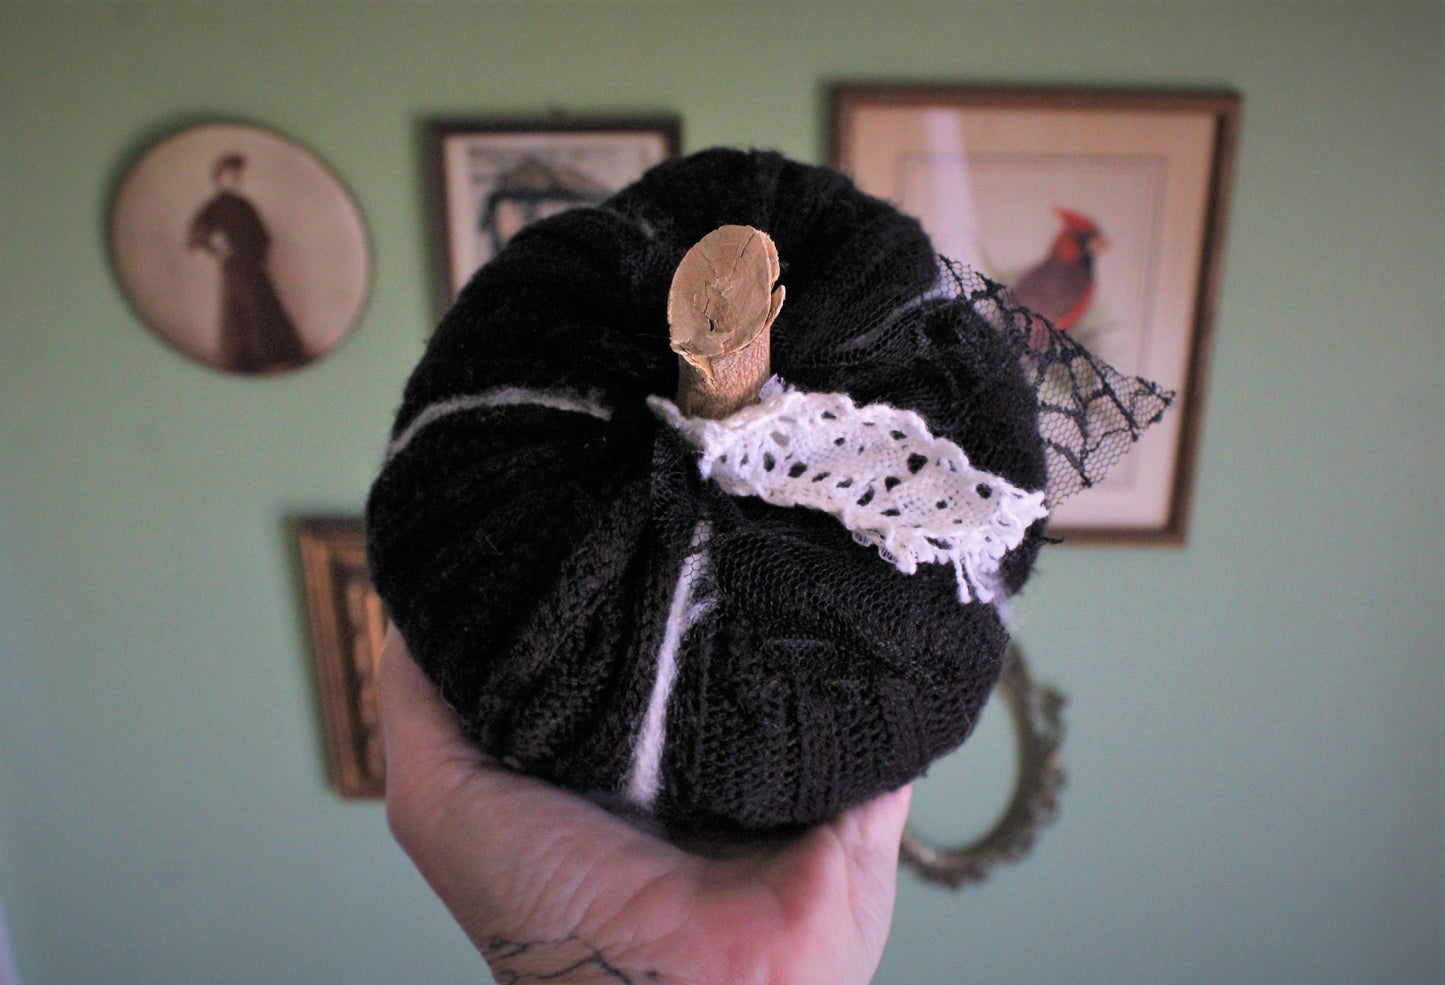 Black Knit Pumpkin Pillow Pouf, With Black Spiderweb Lace, Ivory Lace and Wooden Stem